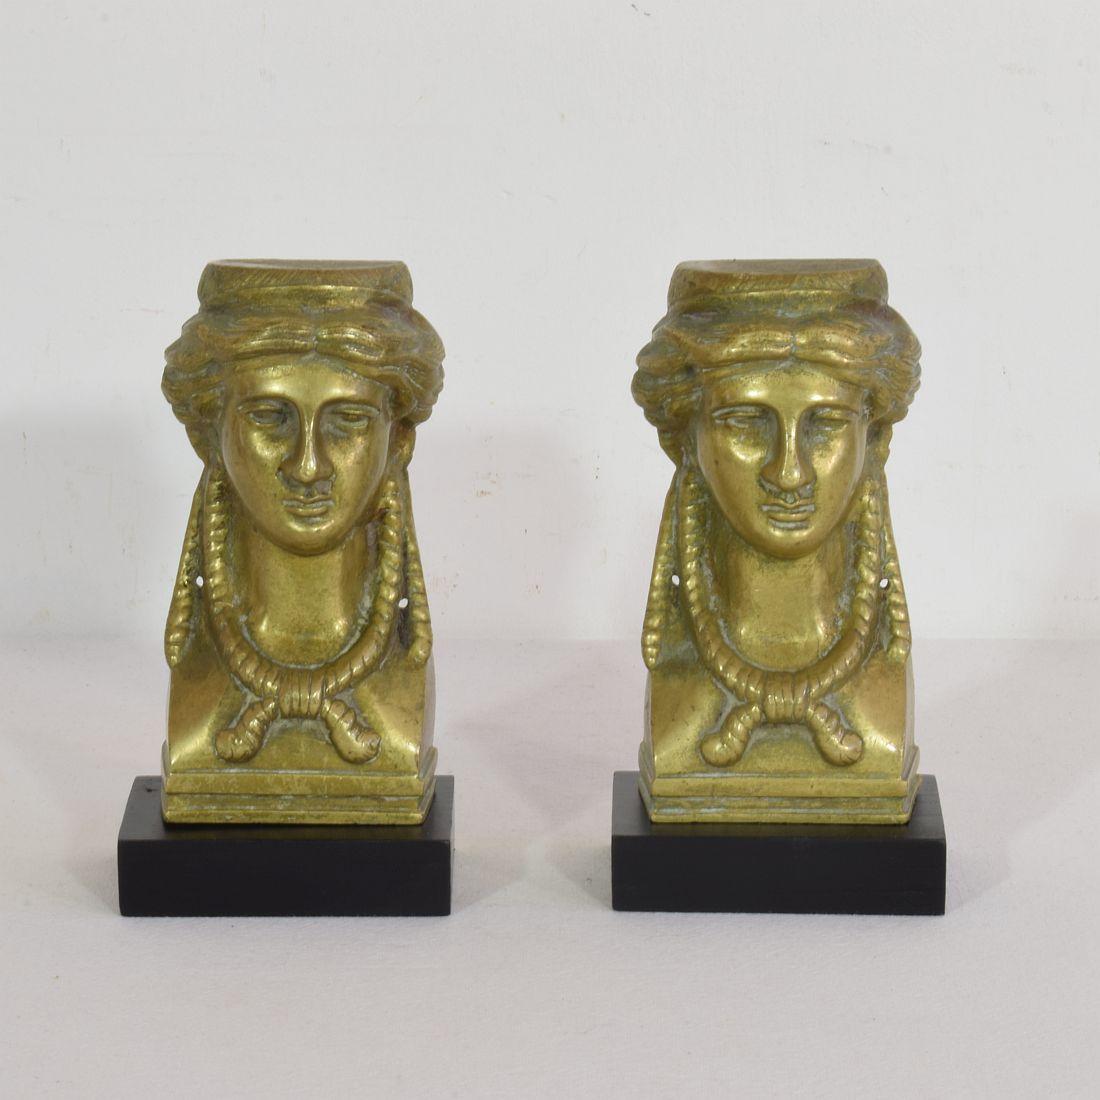 Beautiful pair of bronze Empire style head ornaments. Most likely once adorned a stunning armoire or table
France circa 1800-1850.
Measurements individual and include the wooden base.